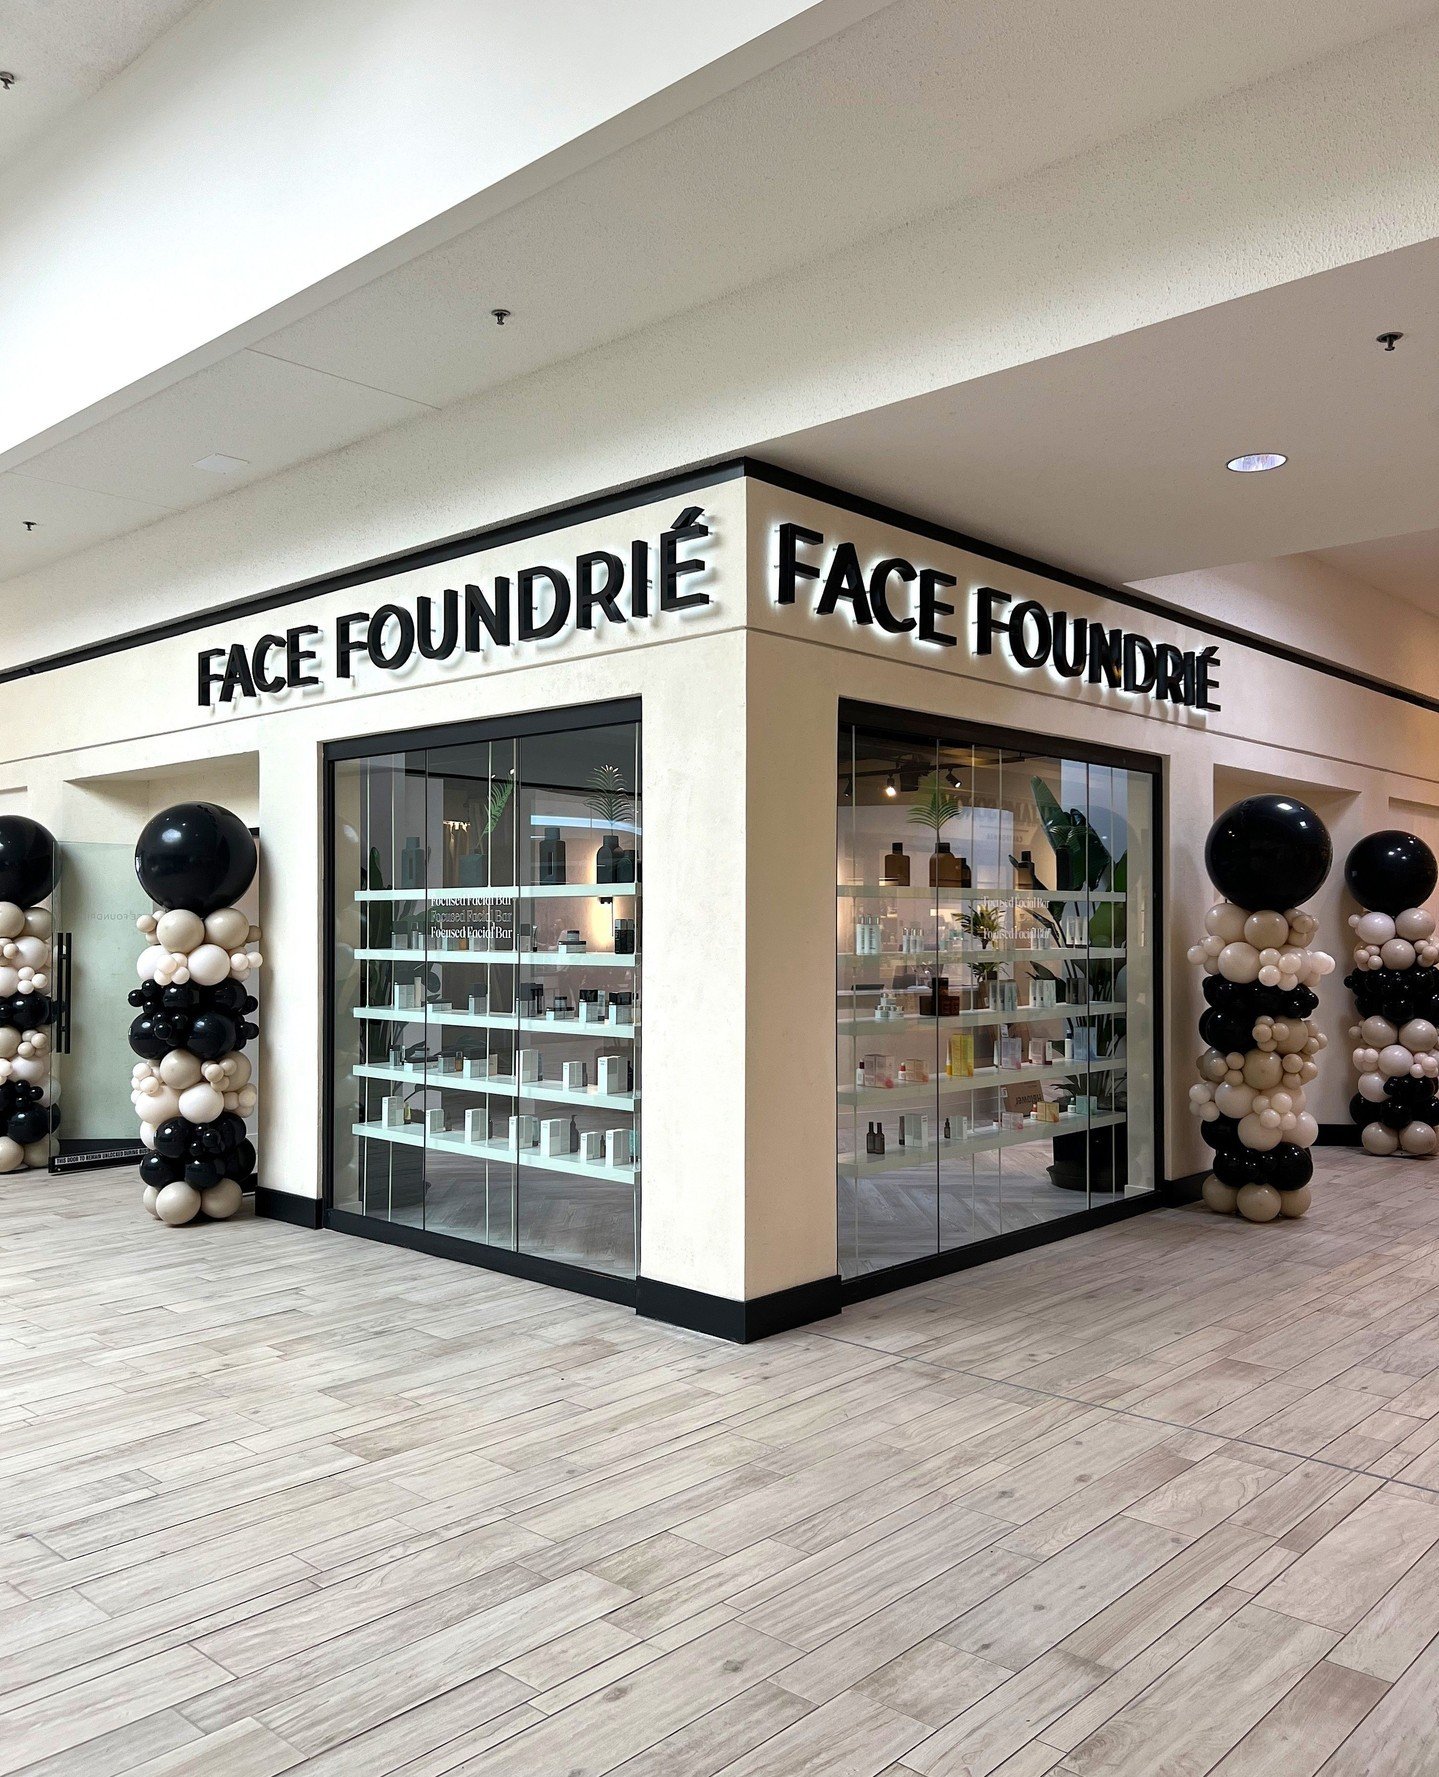 Welcome to your new home, @facefoundrie! ✨ Our skincare friends have relocated their flagship facial bar within Galleria to a larger, more open space. We invite you to stop by, say hello, and congratulate them on the move, now located across from Wil